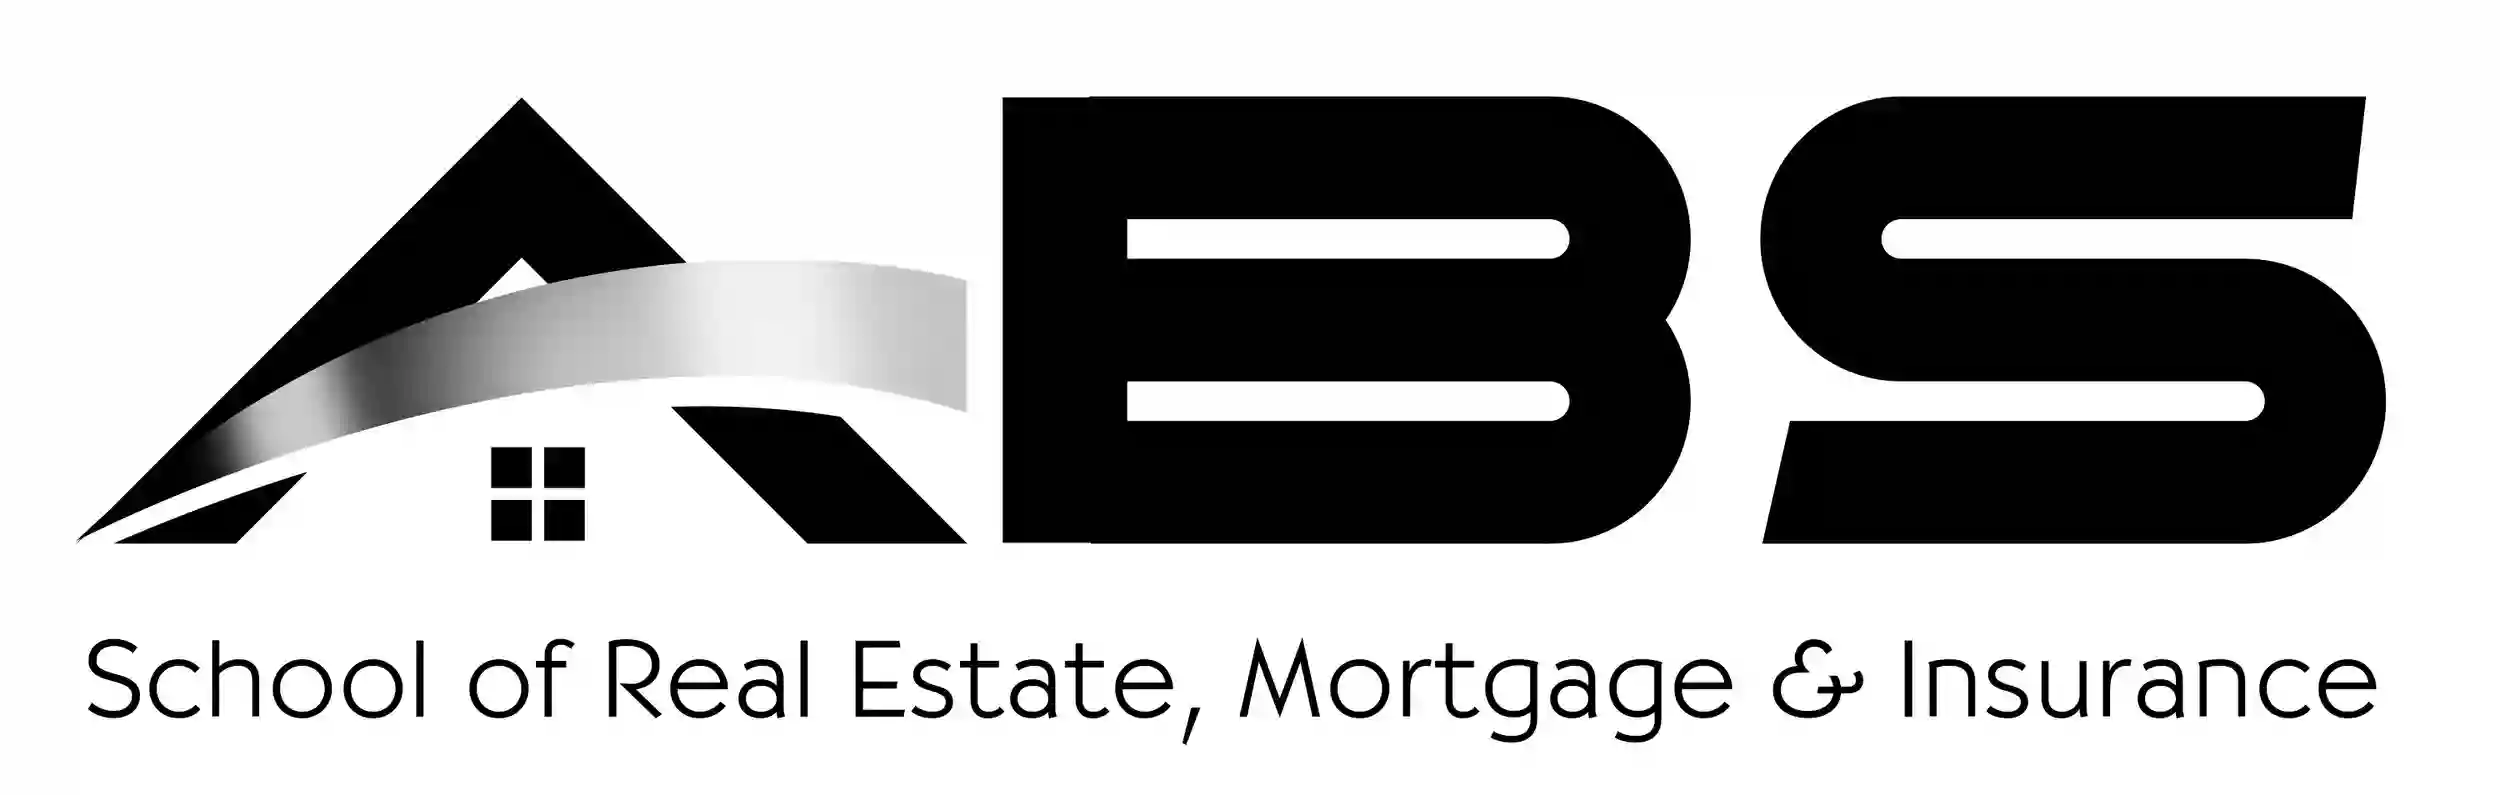 ABS Schools of Real Estate